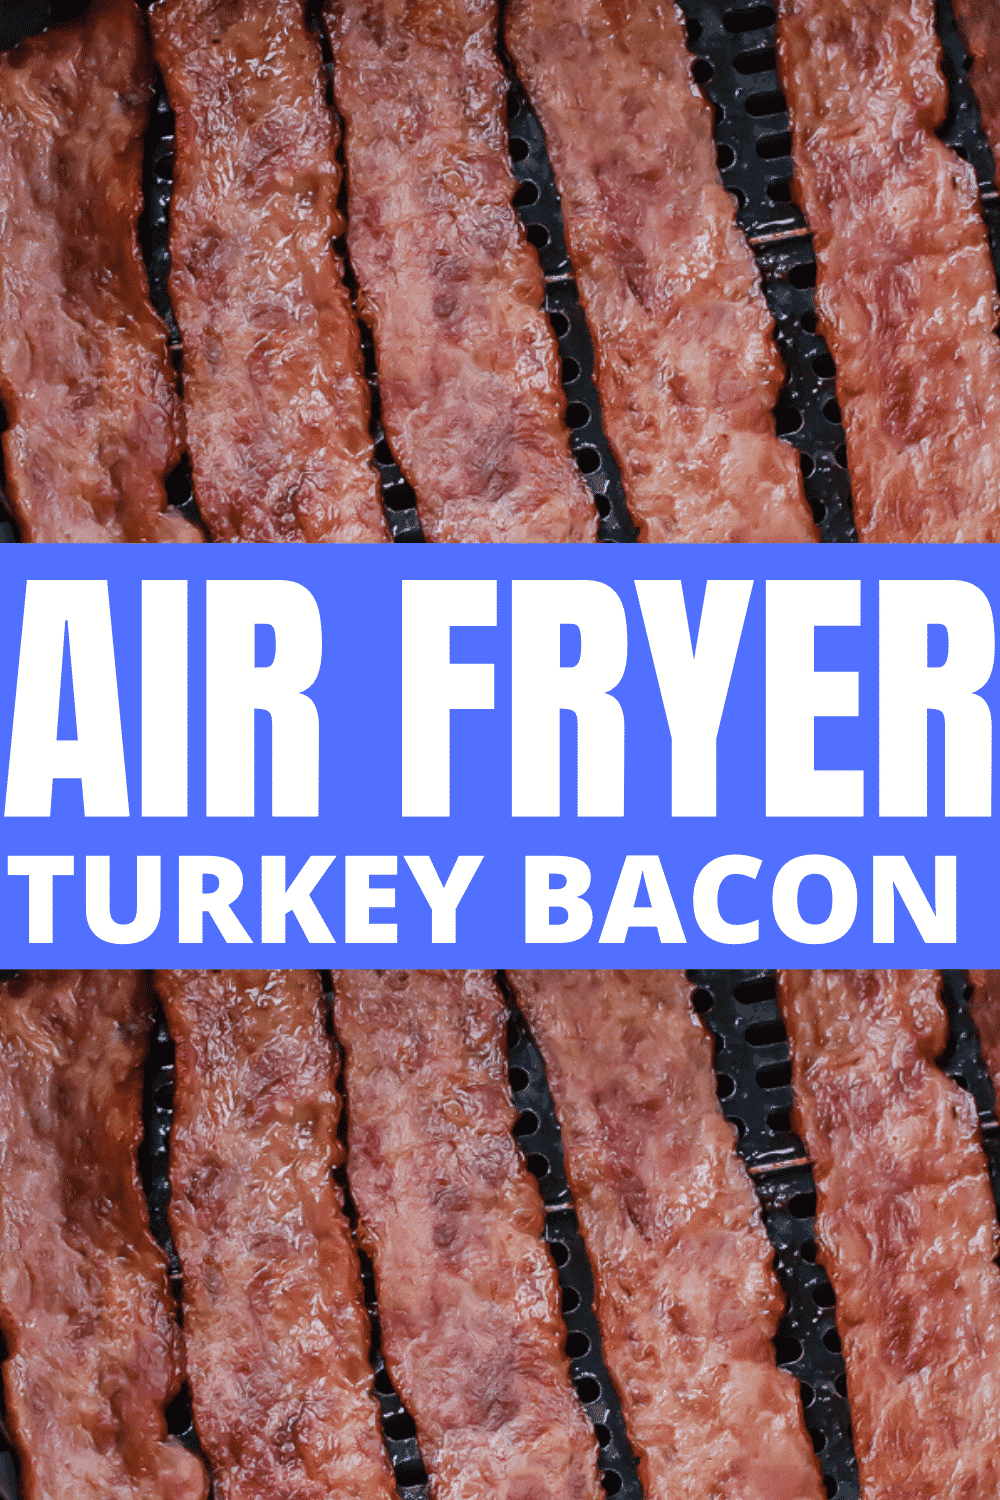 Air fryer turkey bacon is so easy to make, you'll be amazed. Turkey bacon comes out crispy and perfect in your air fryer in less than 10 minutes. #breakfast #airfryerturkeybacon via @vegetarianmamma